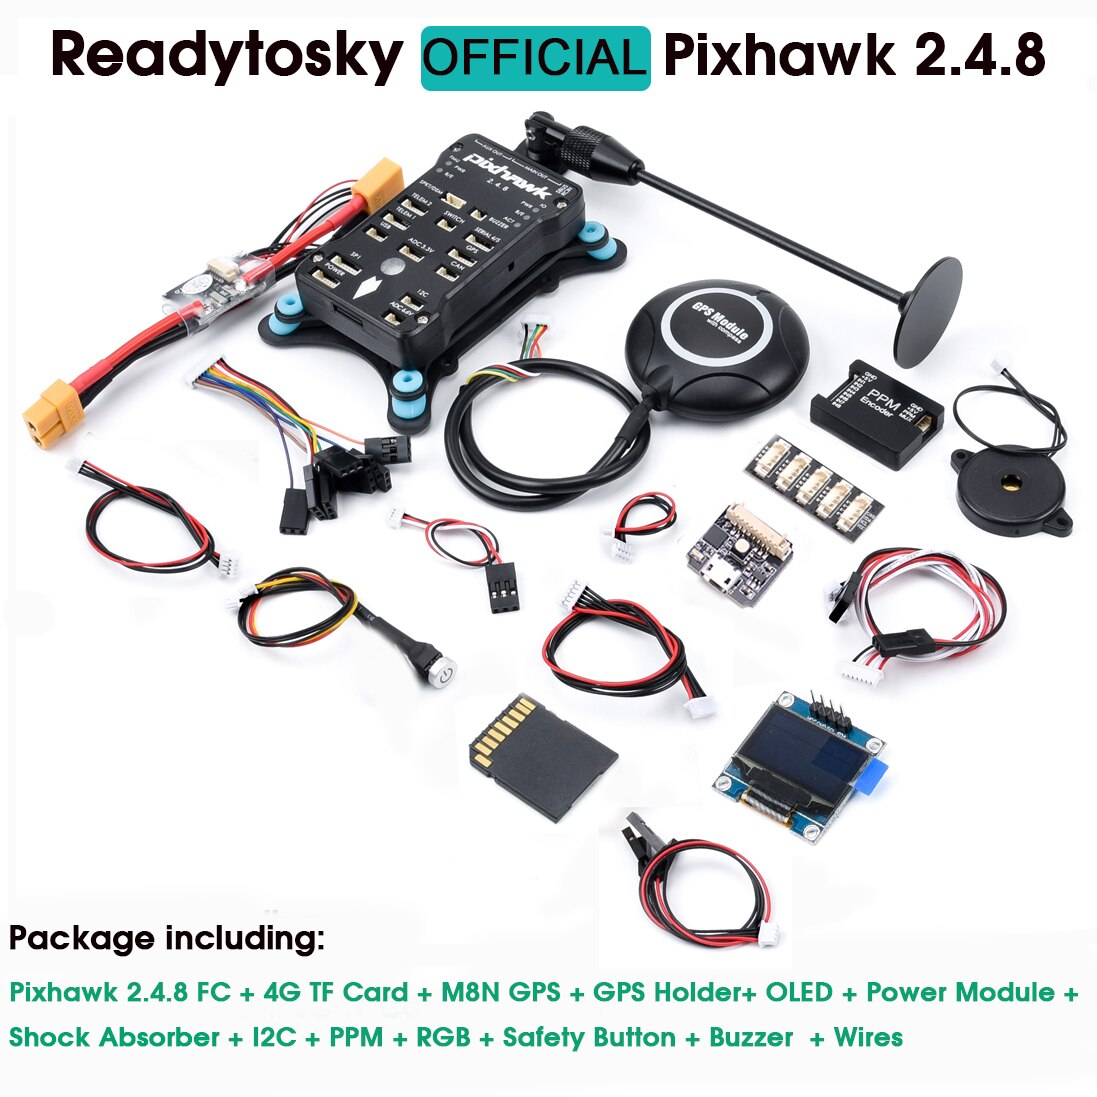 Package includes: Pixhawk 2.4.8 FC + 4G TF Card + M8N